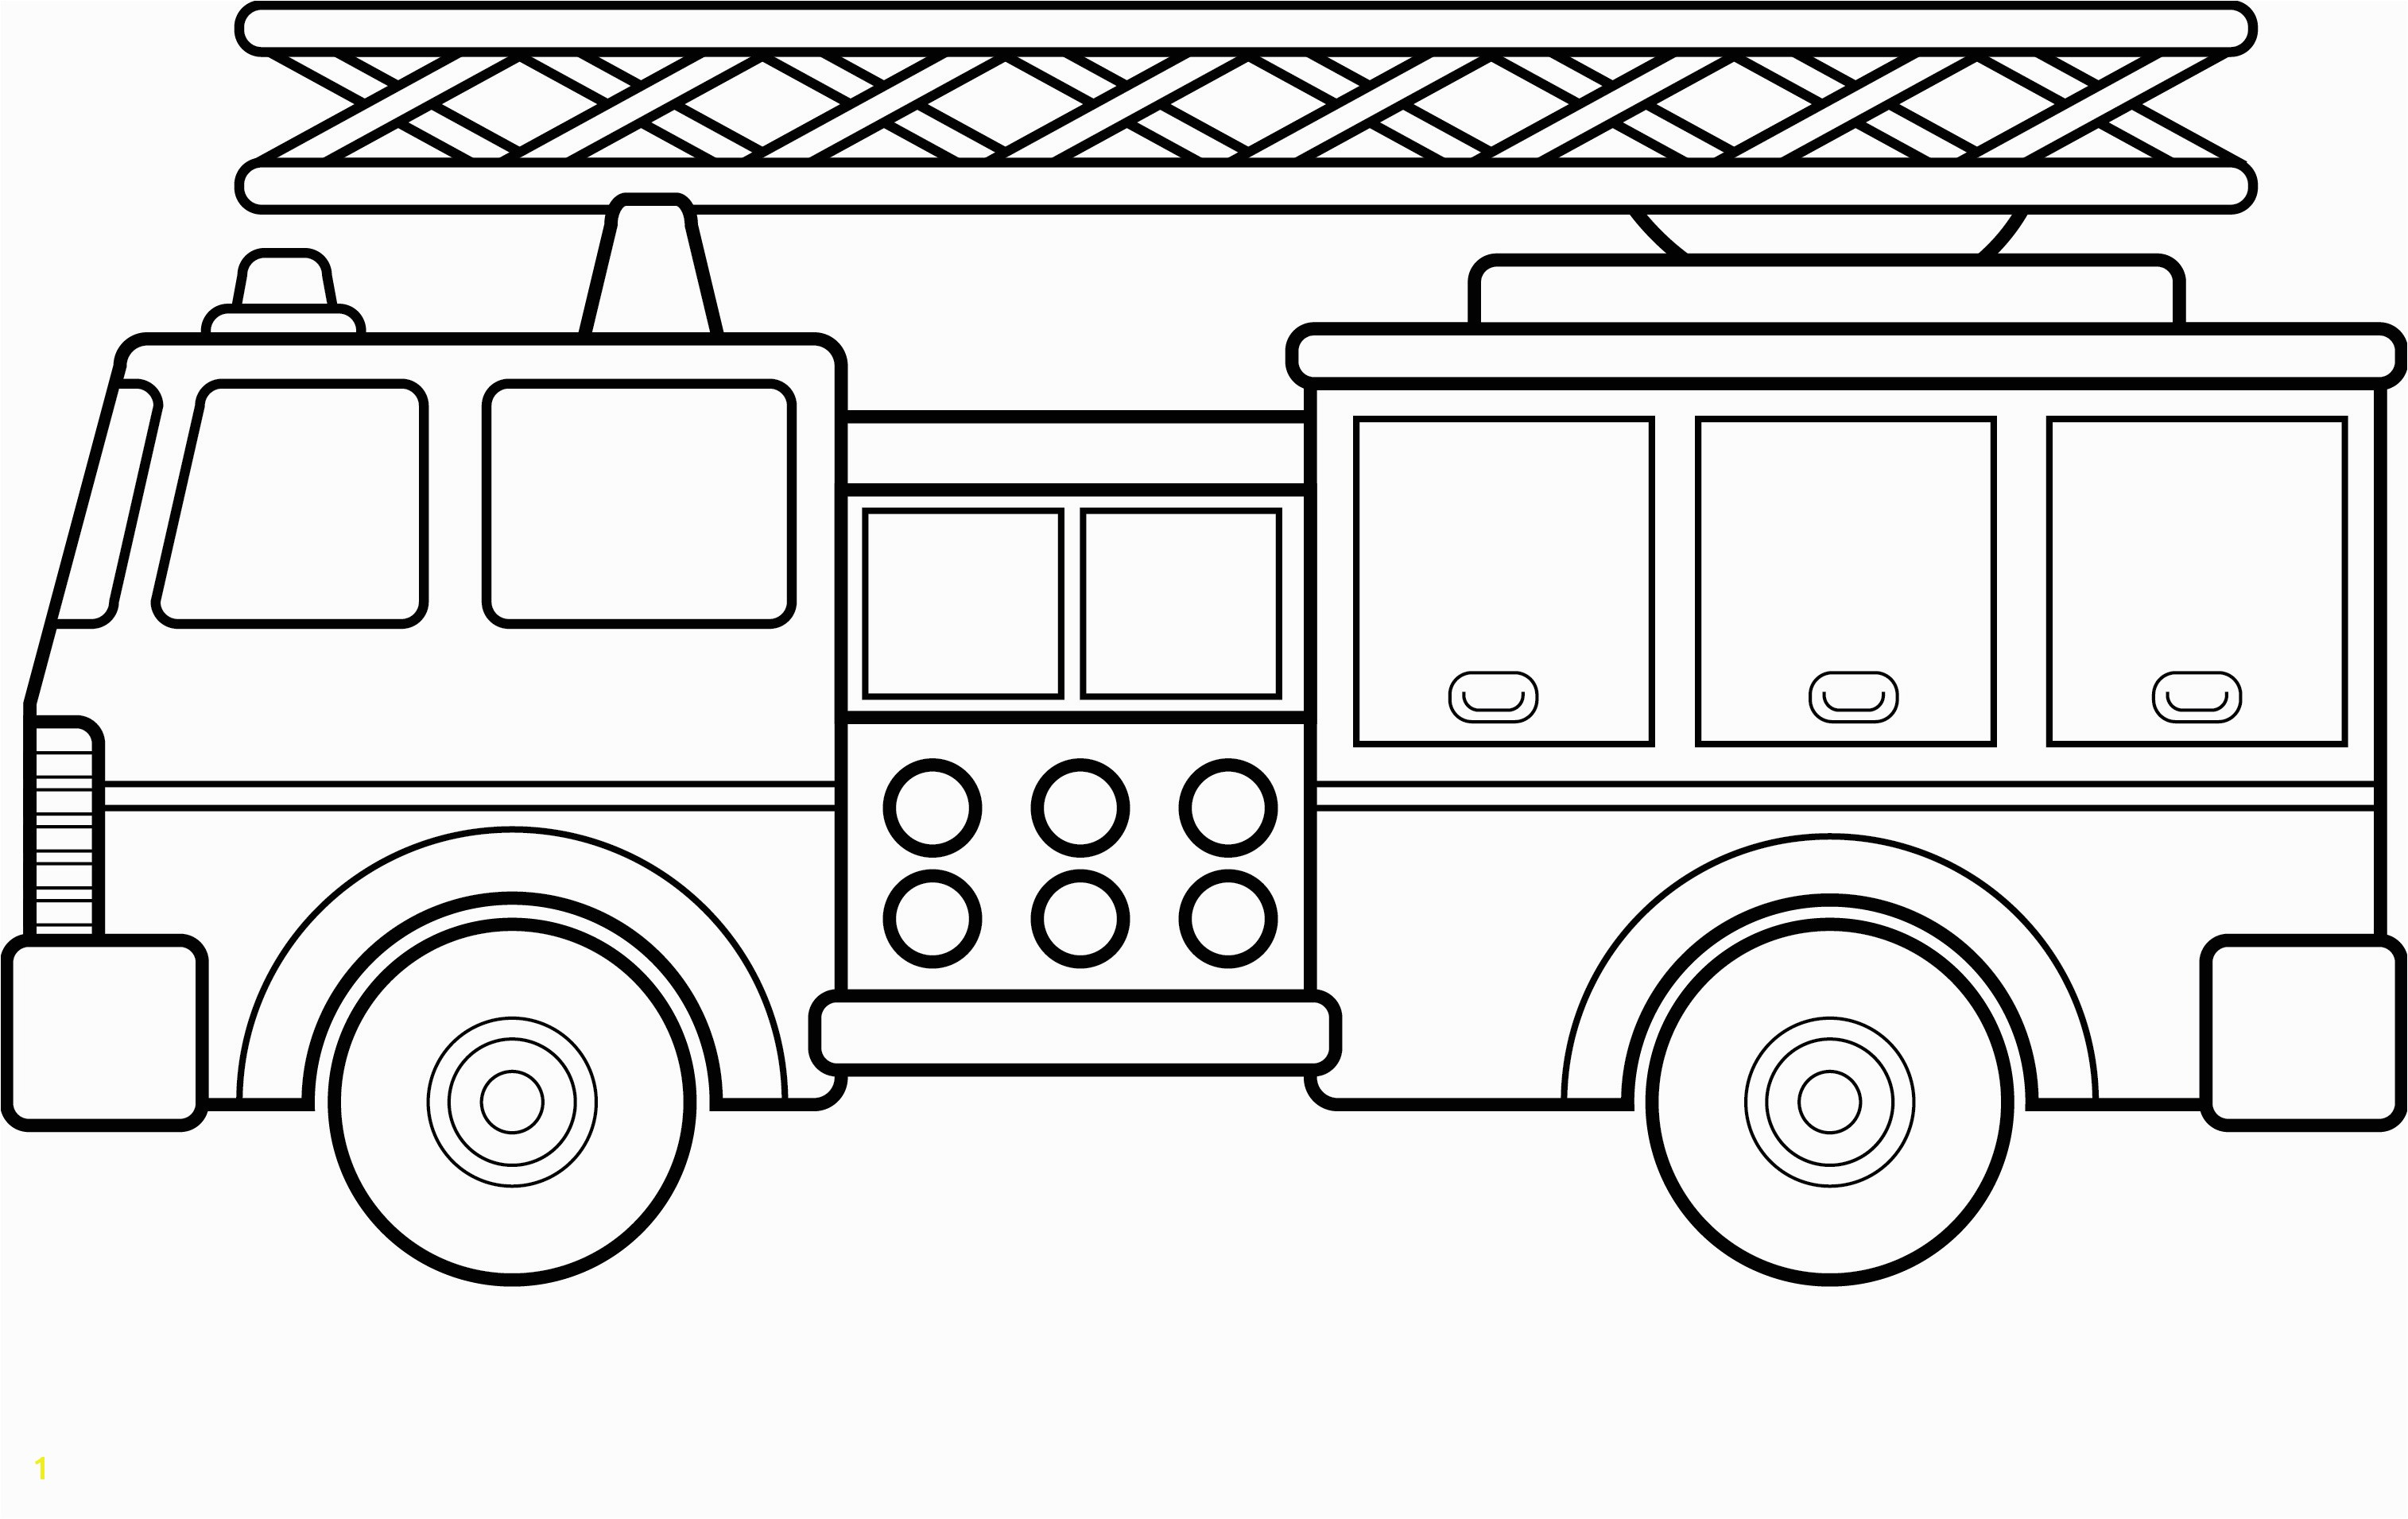 Dump Truck Coloring Pages Pdf Fire Truck Coloring Pages Sample thephotosync